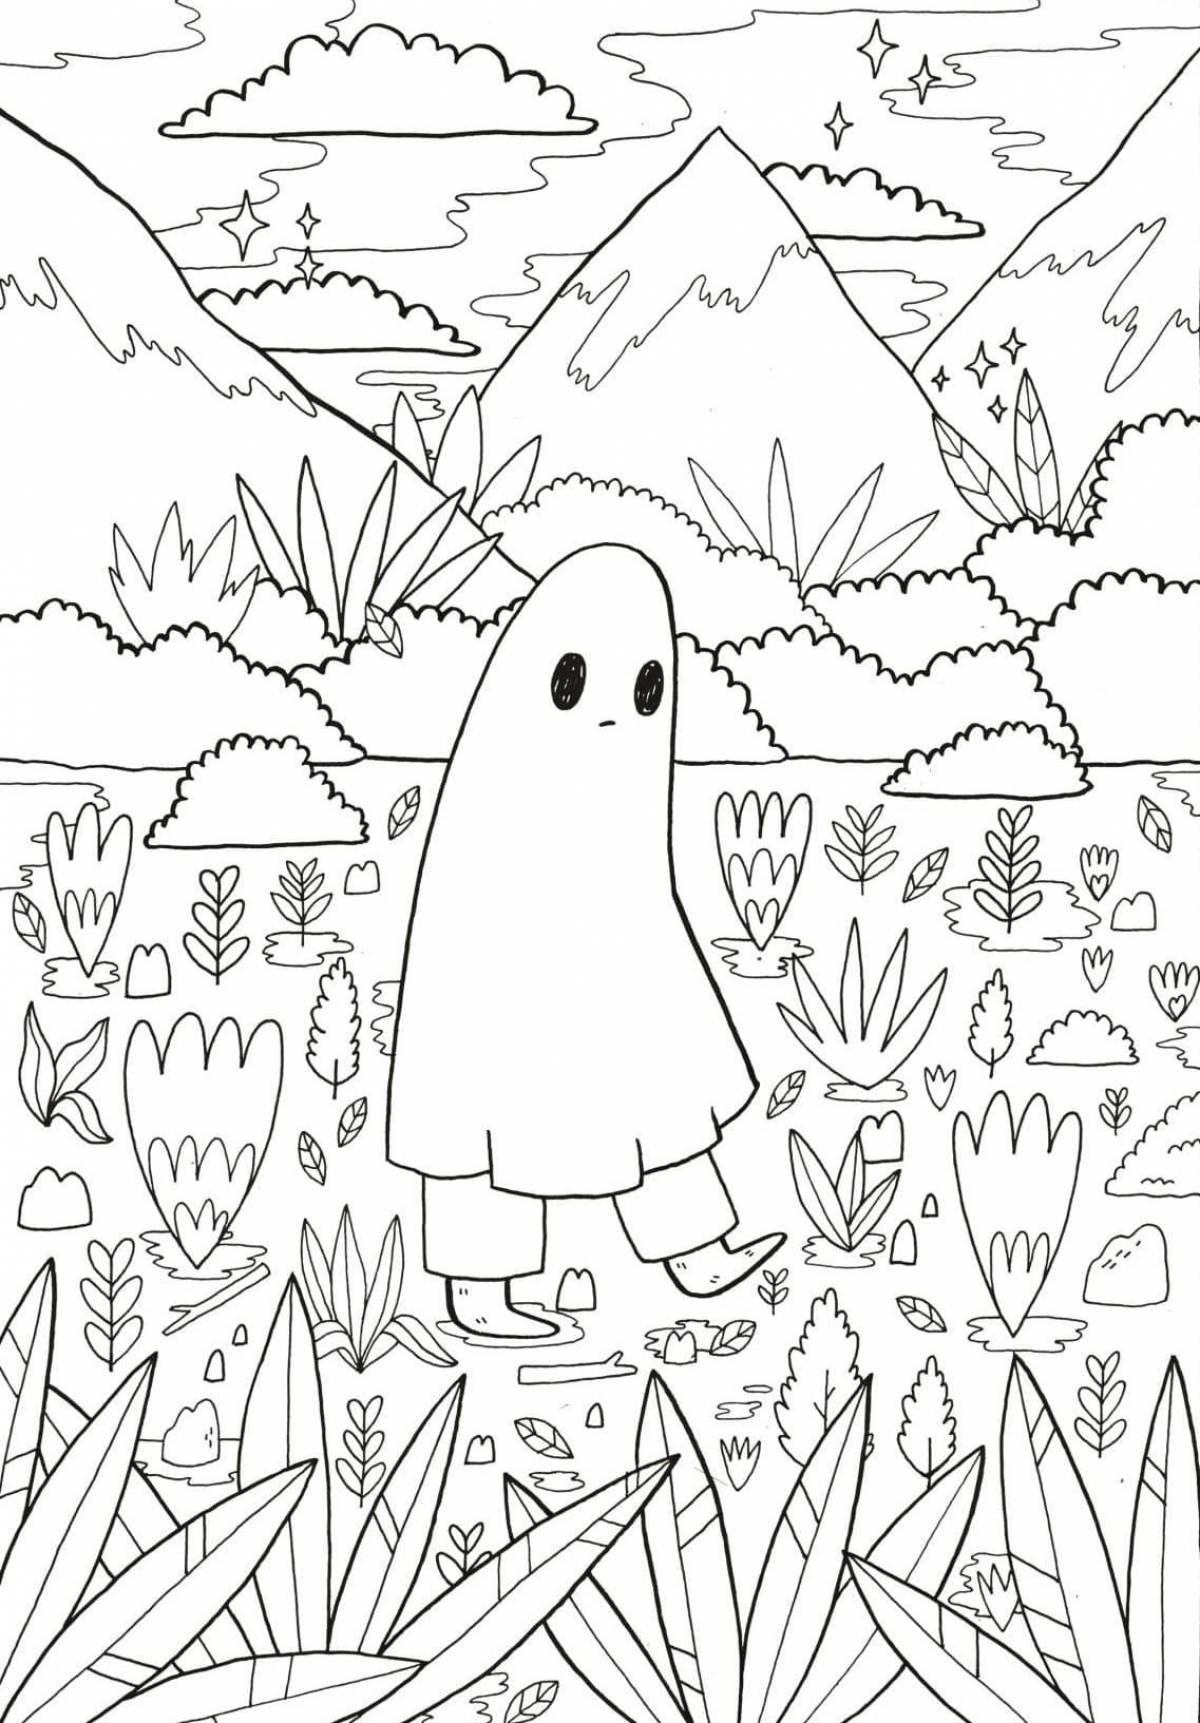 Coloring-imagination coloring page wall indie kid